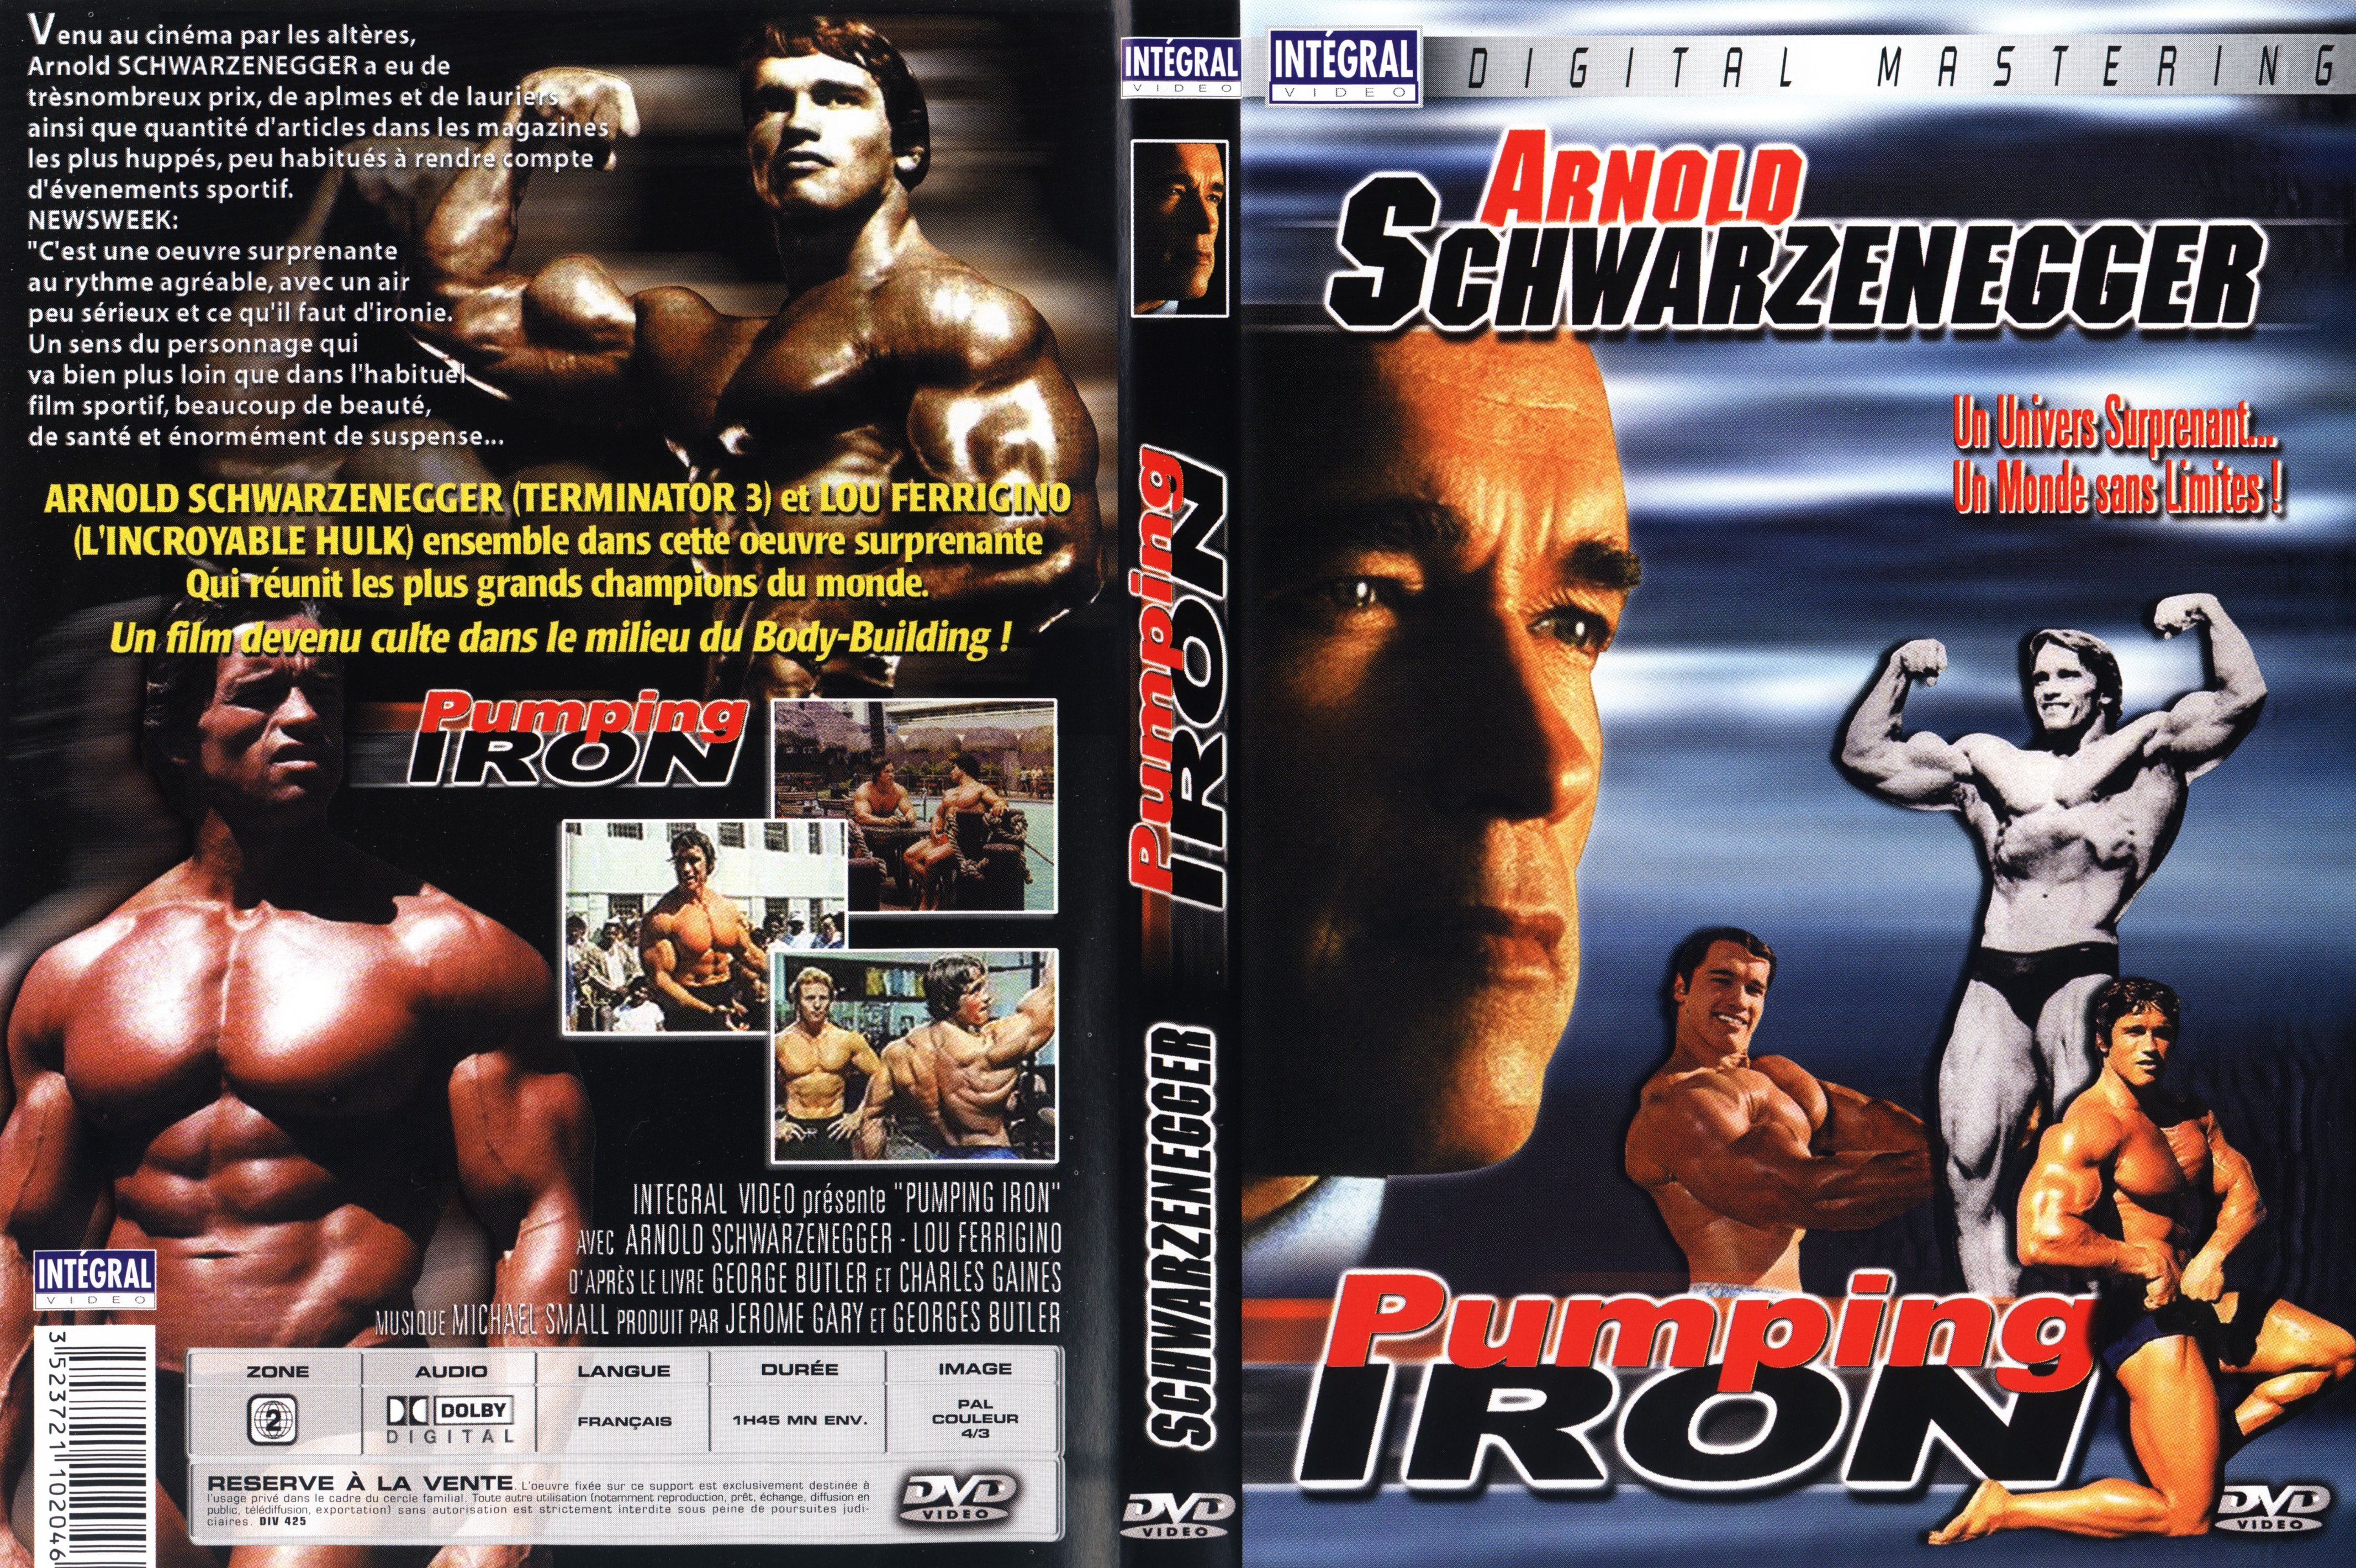 Jaquette DVD Pumping Iron